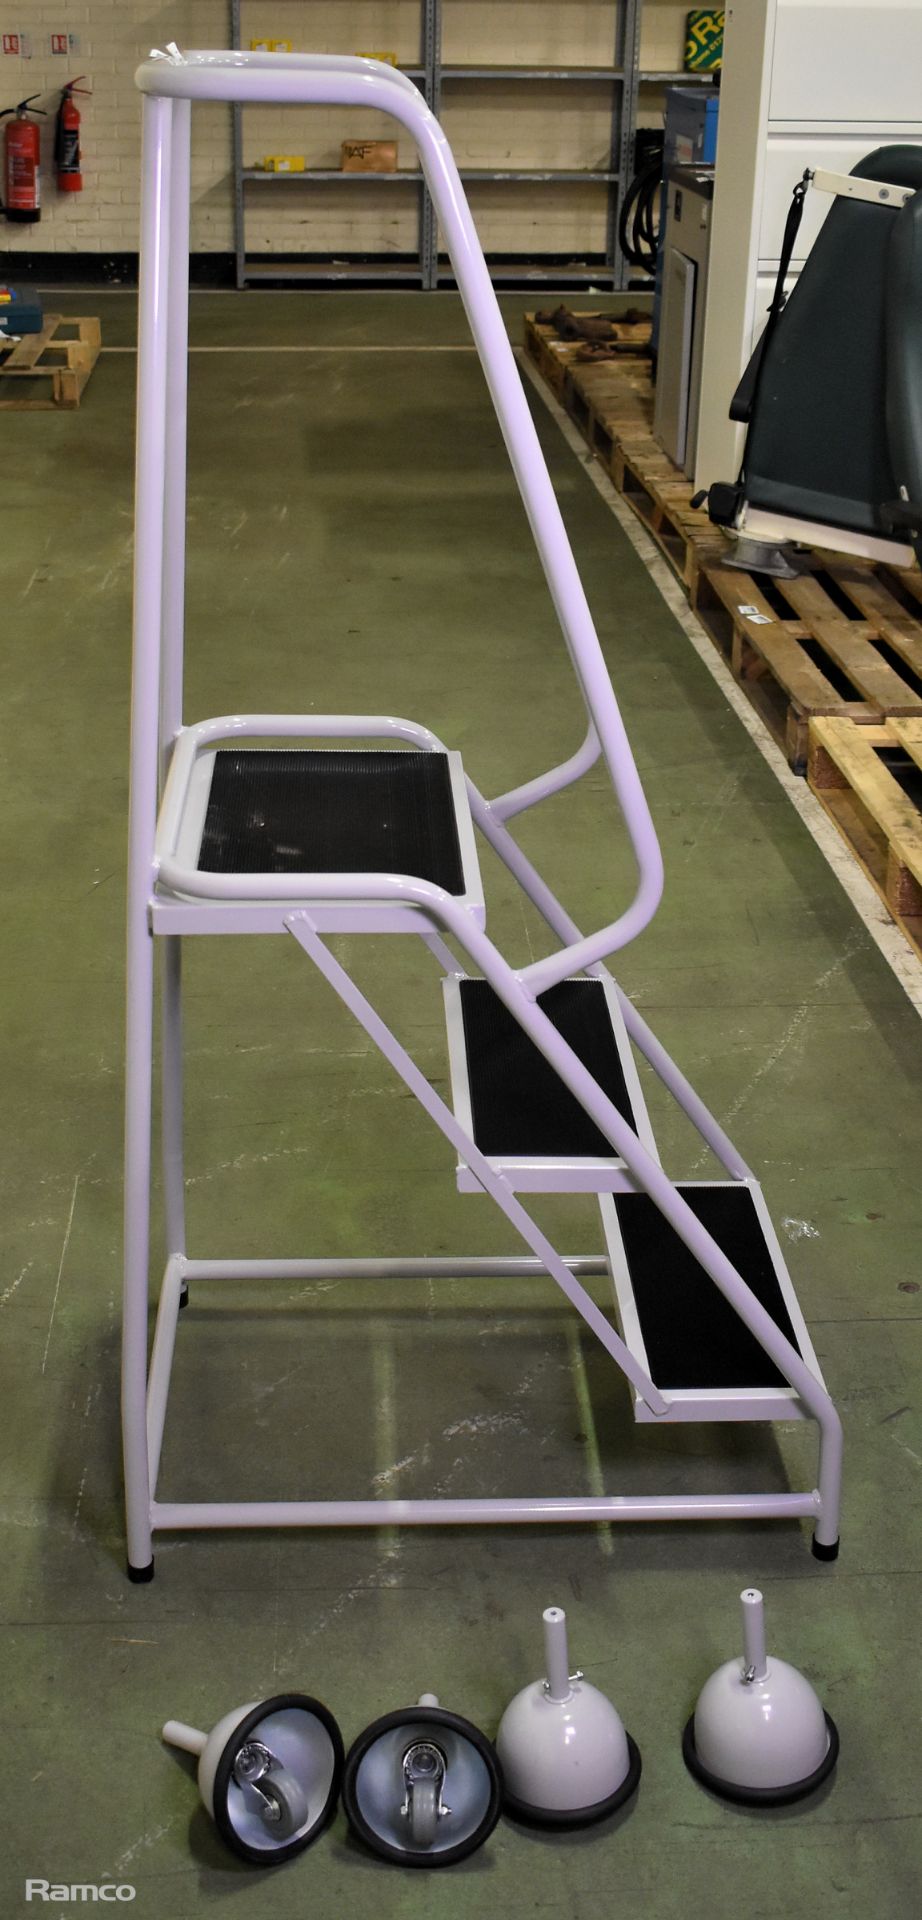 Glide along mobile steps, 3 rubber tread and handrail with platform guard - L 530 x W 840 x H 1430mm - Image 3 of 6